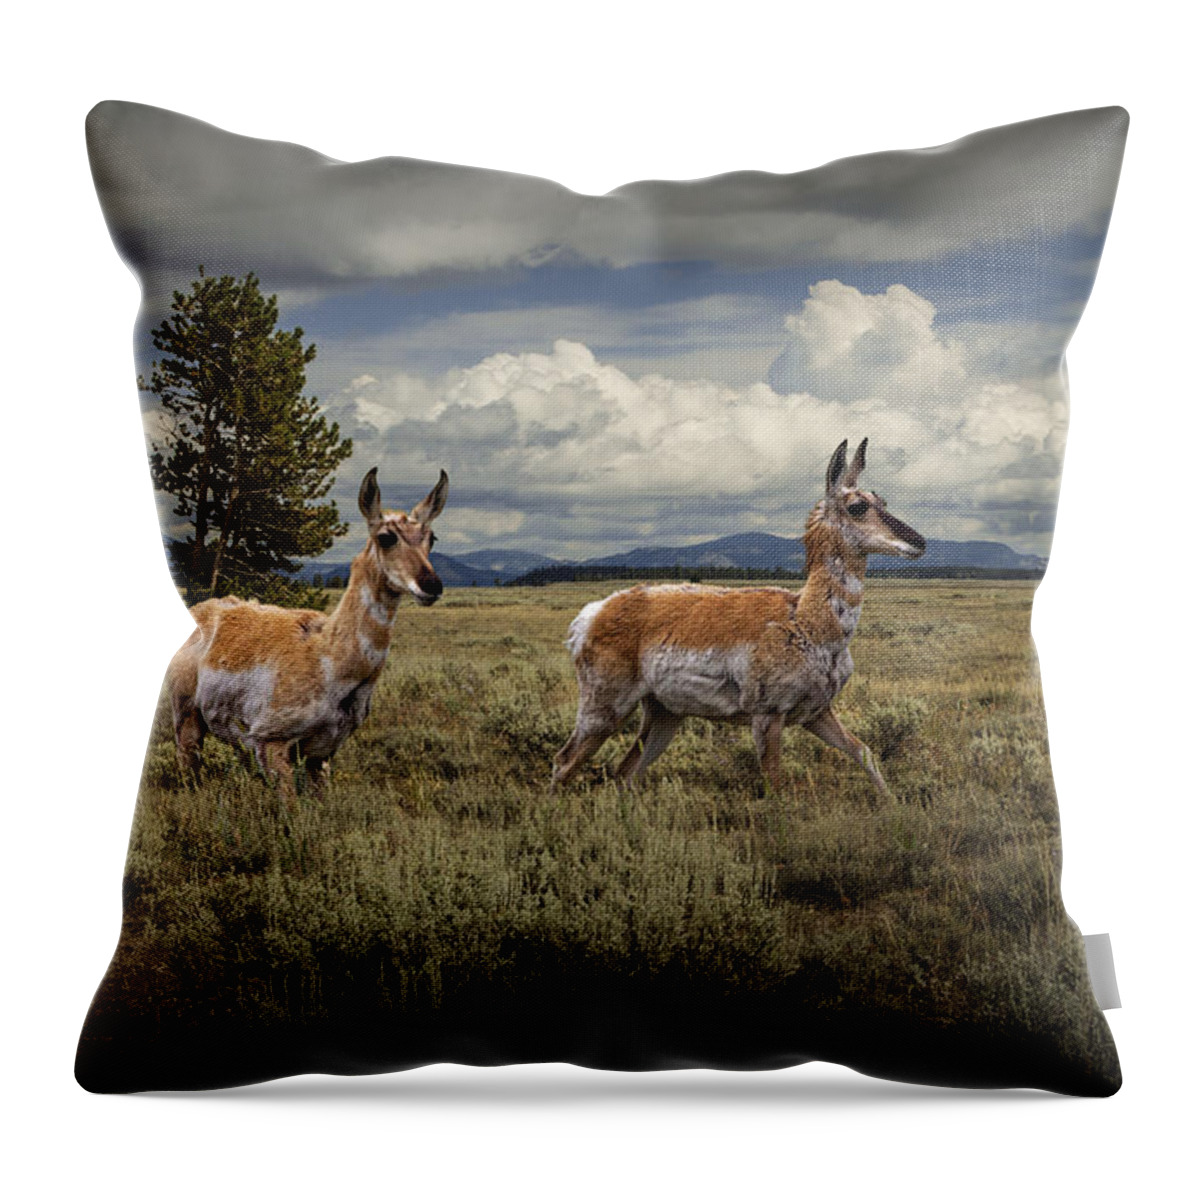 Antelope Throw Pillow featuring the photograph Pronghorn Antelopes by Randall Nyhof